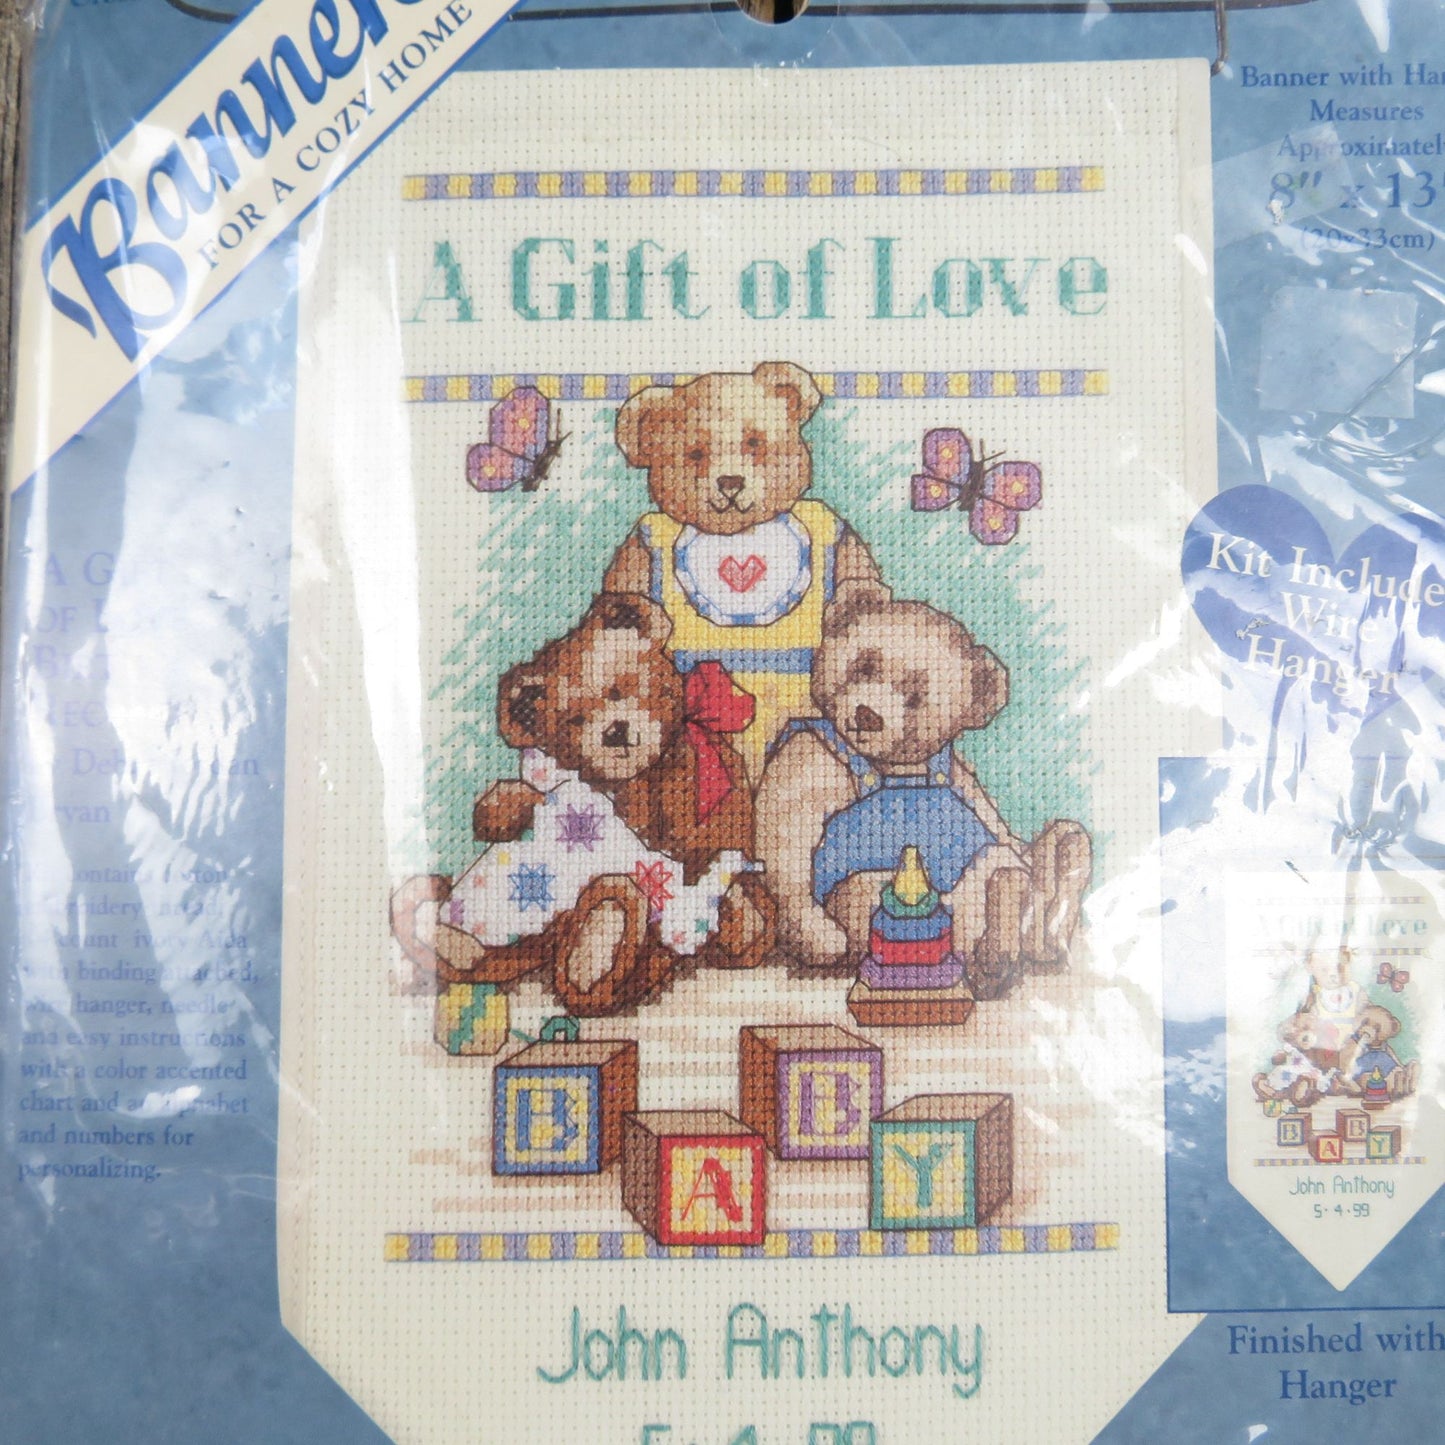 Counted Cross Stitch Banner Kit Baby Birth Record Teddy Bear Dimensions Shower Gift 72507